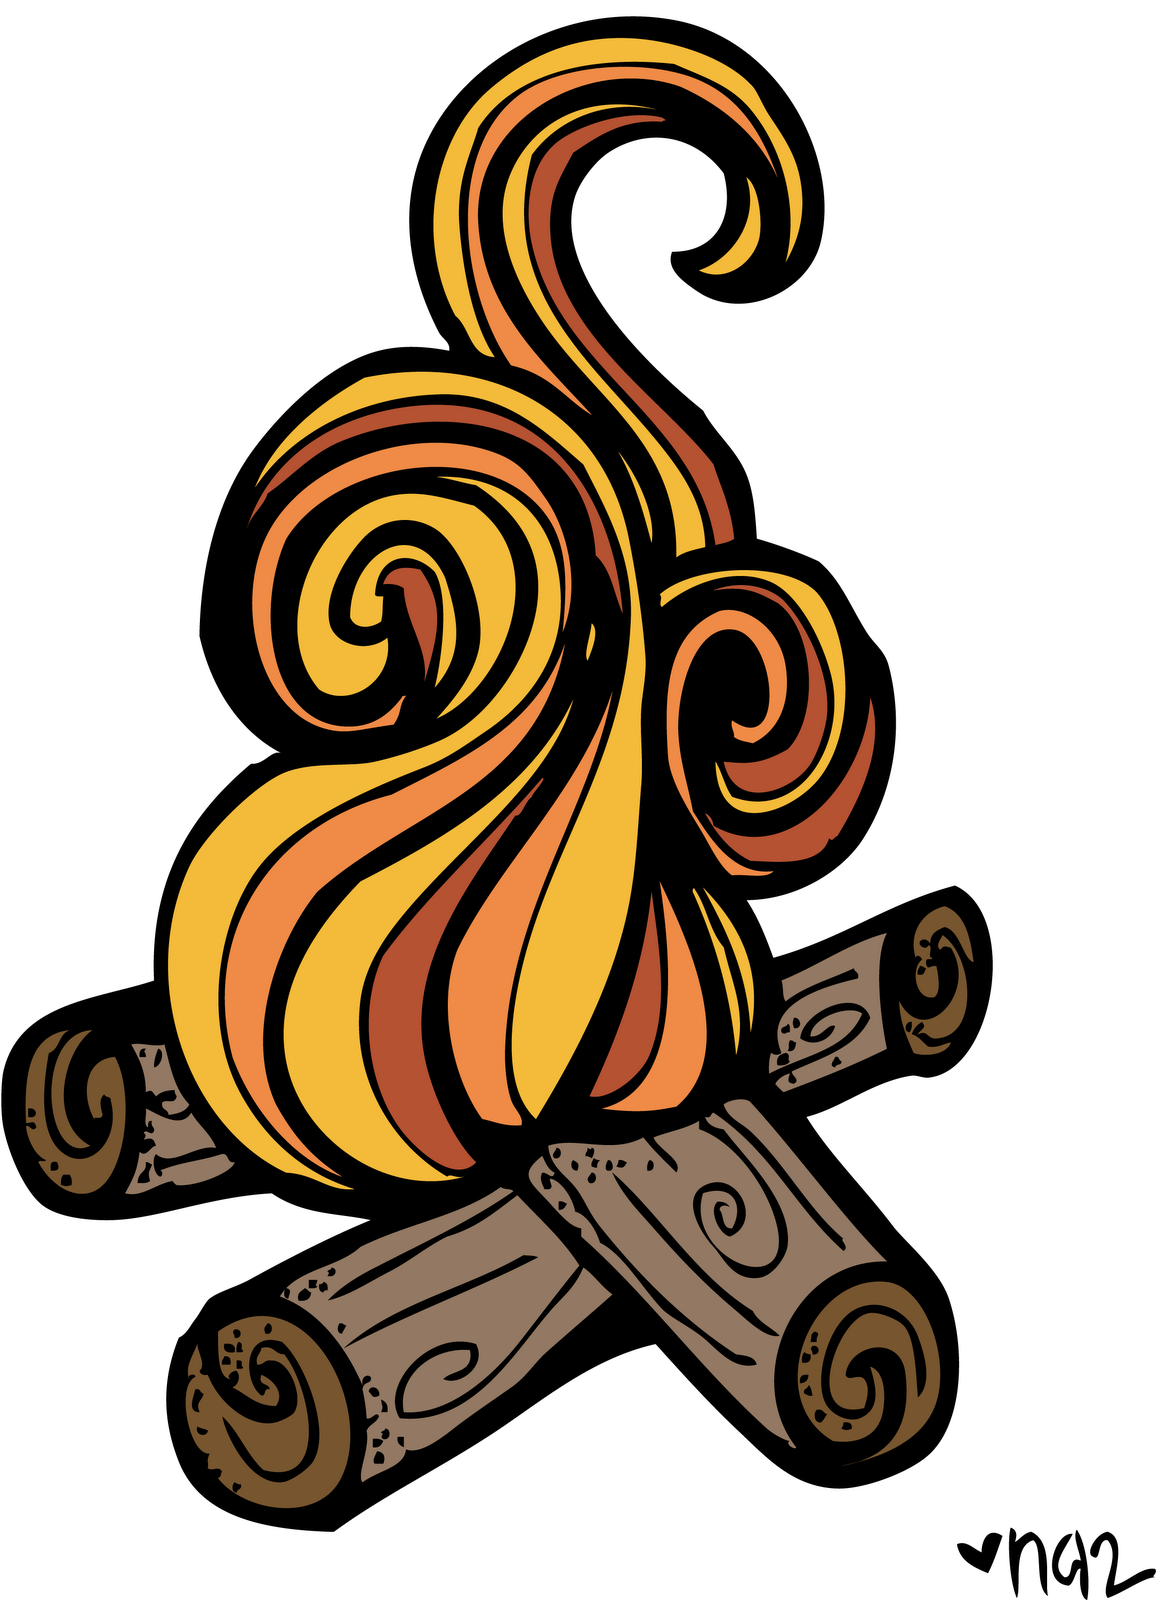 Pix For Smores Campfire Clipart - Campfire Smores, Transparent background PNG HD thumbnail